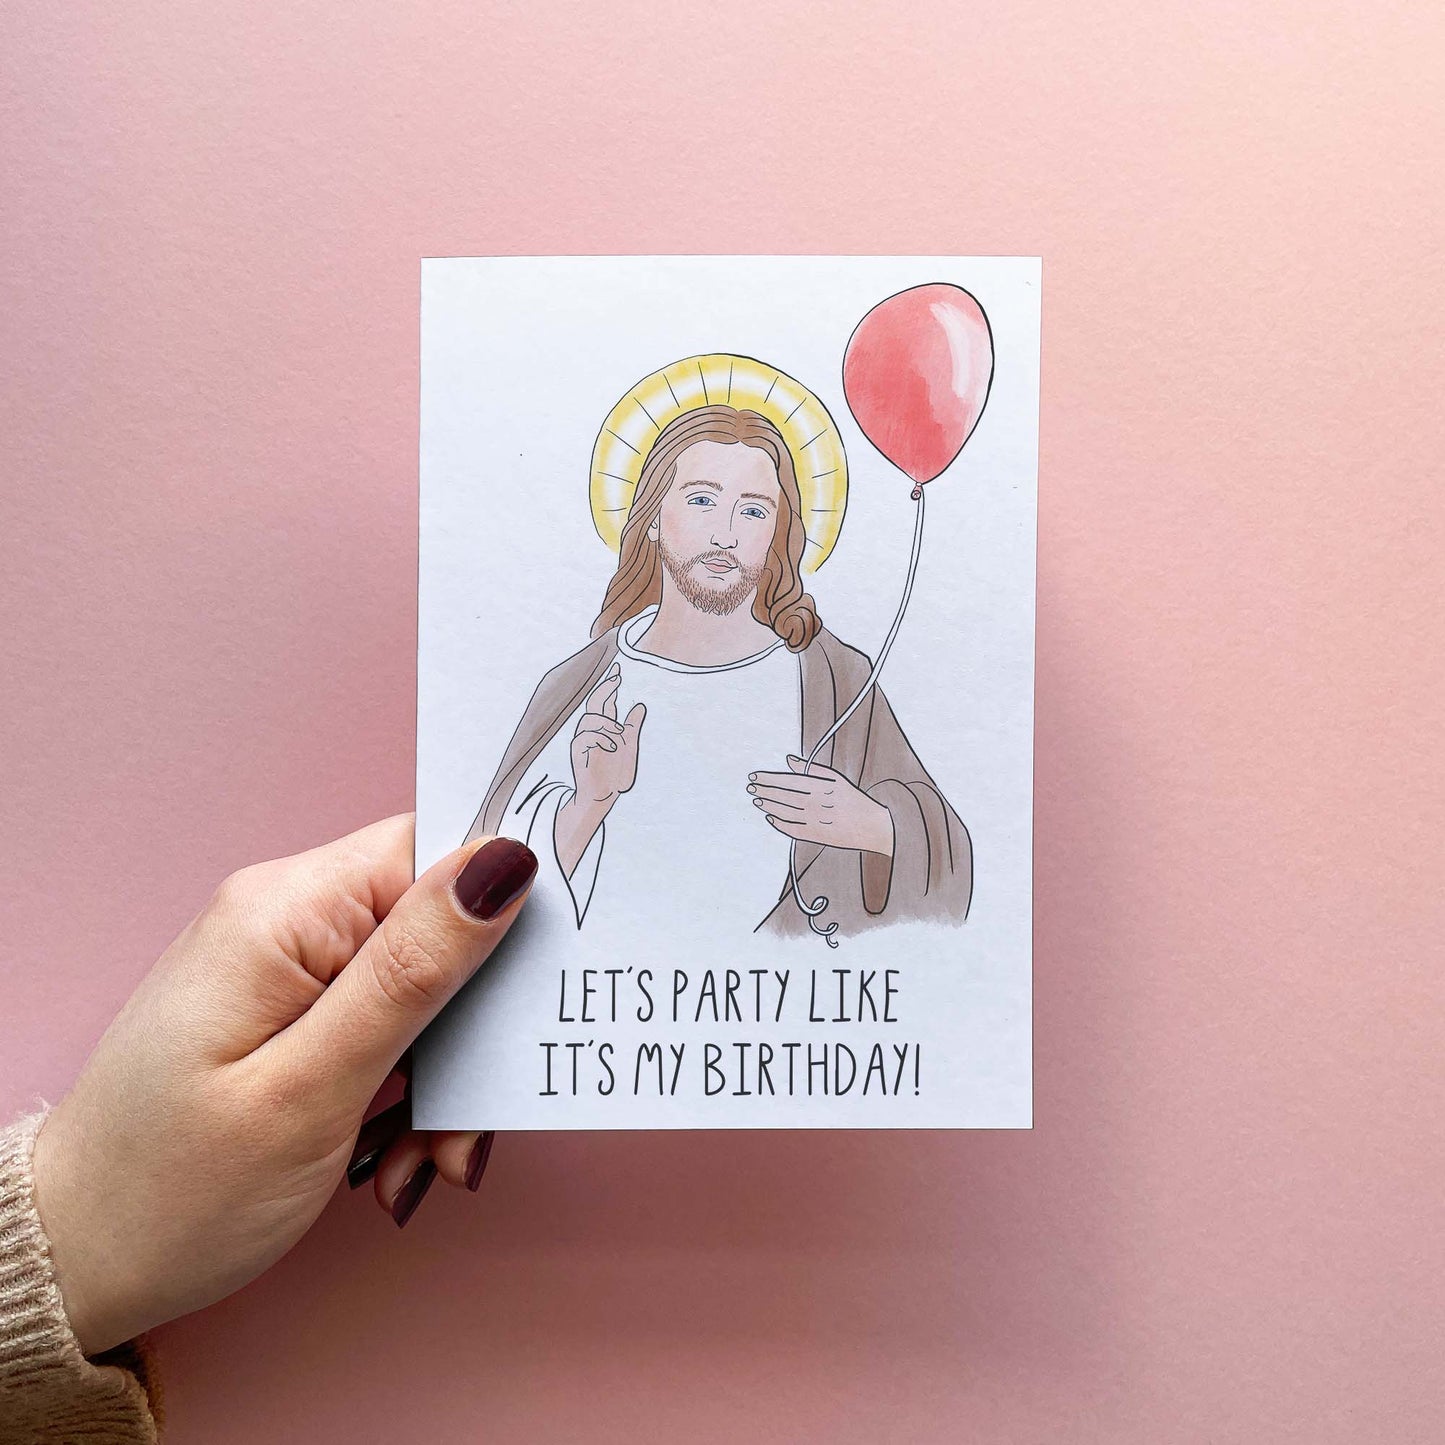 Birthday Party - Funny Merry Christmas Card